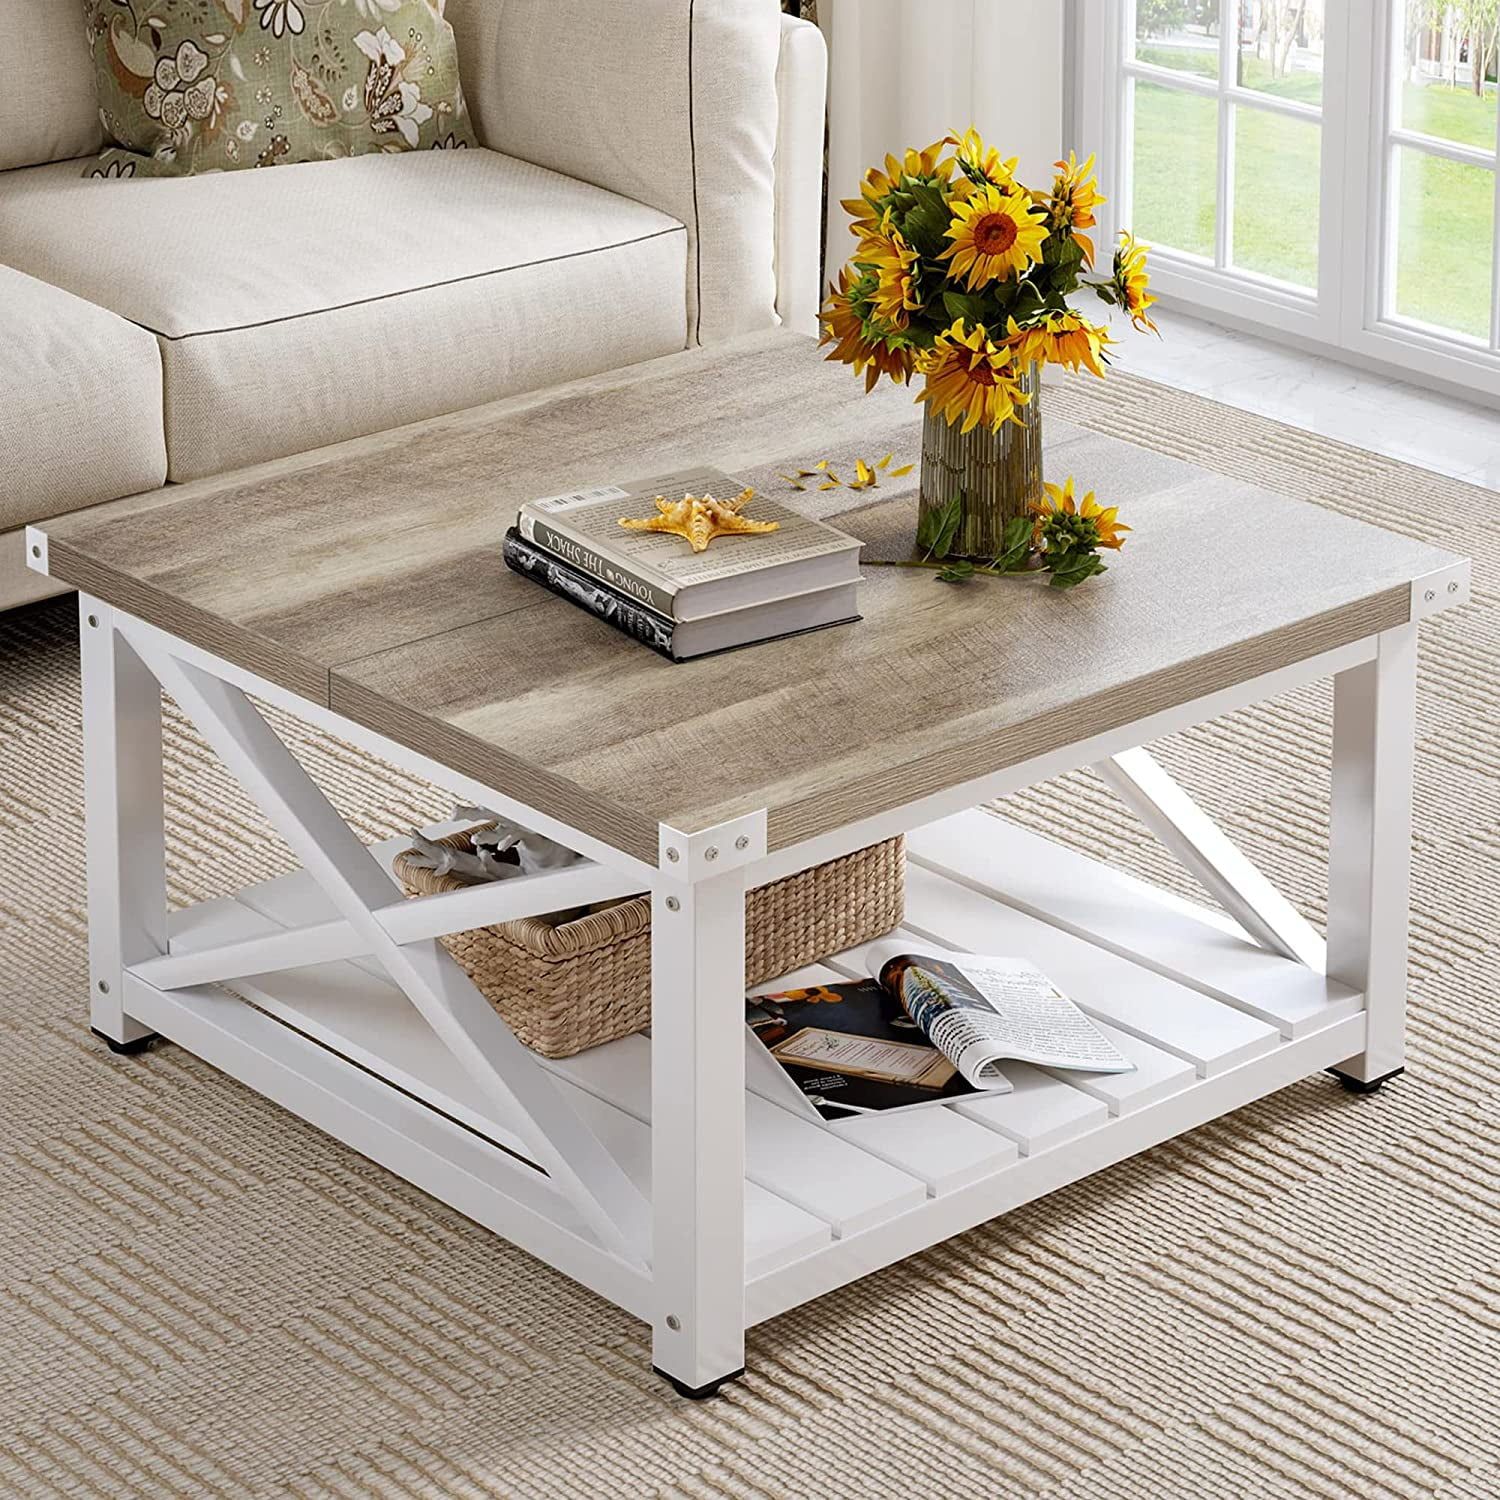 Dextrus Farmhouse Coffee Table For Living Room, Square Wood Coffee Table  With Open Storage Shelf – Walmart In Living Room Farmhouse Coffee Tables (Photo 7 of 15)